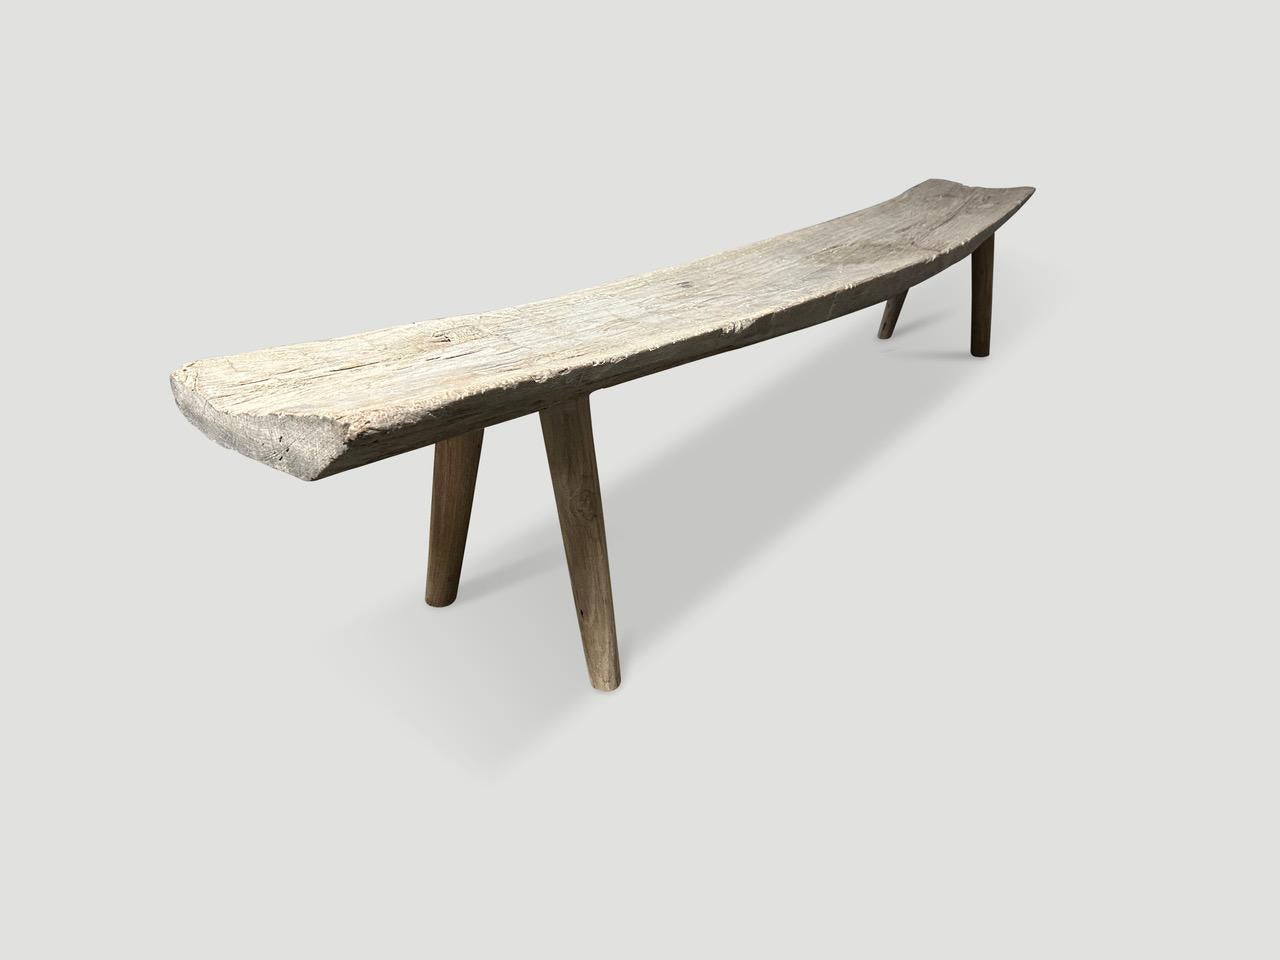 Andrianna Shamaris St. Barts Long Teak Wood Bench  In Excellent Condition For Sale In New York, NY